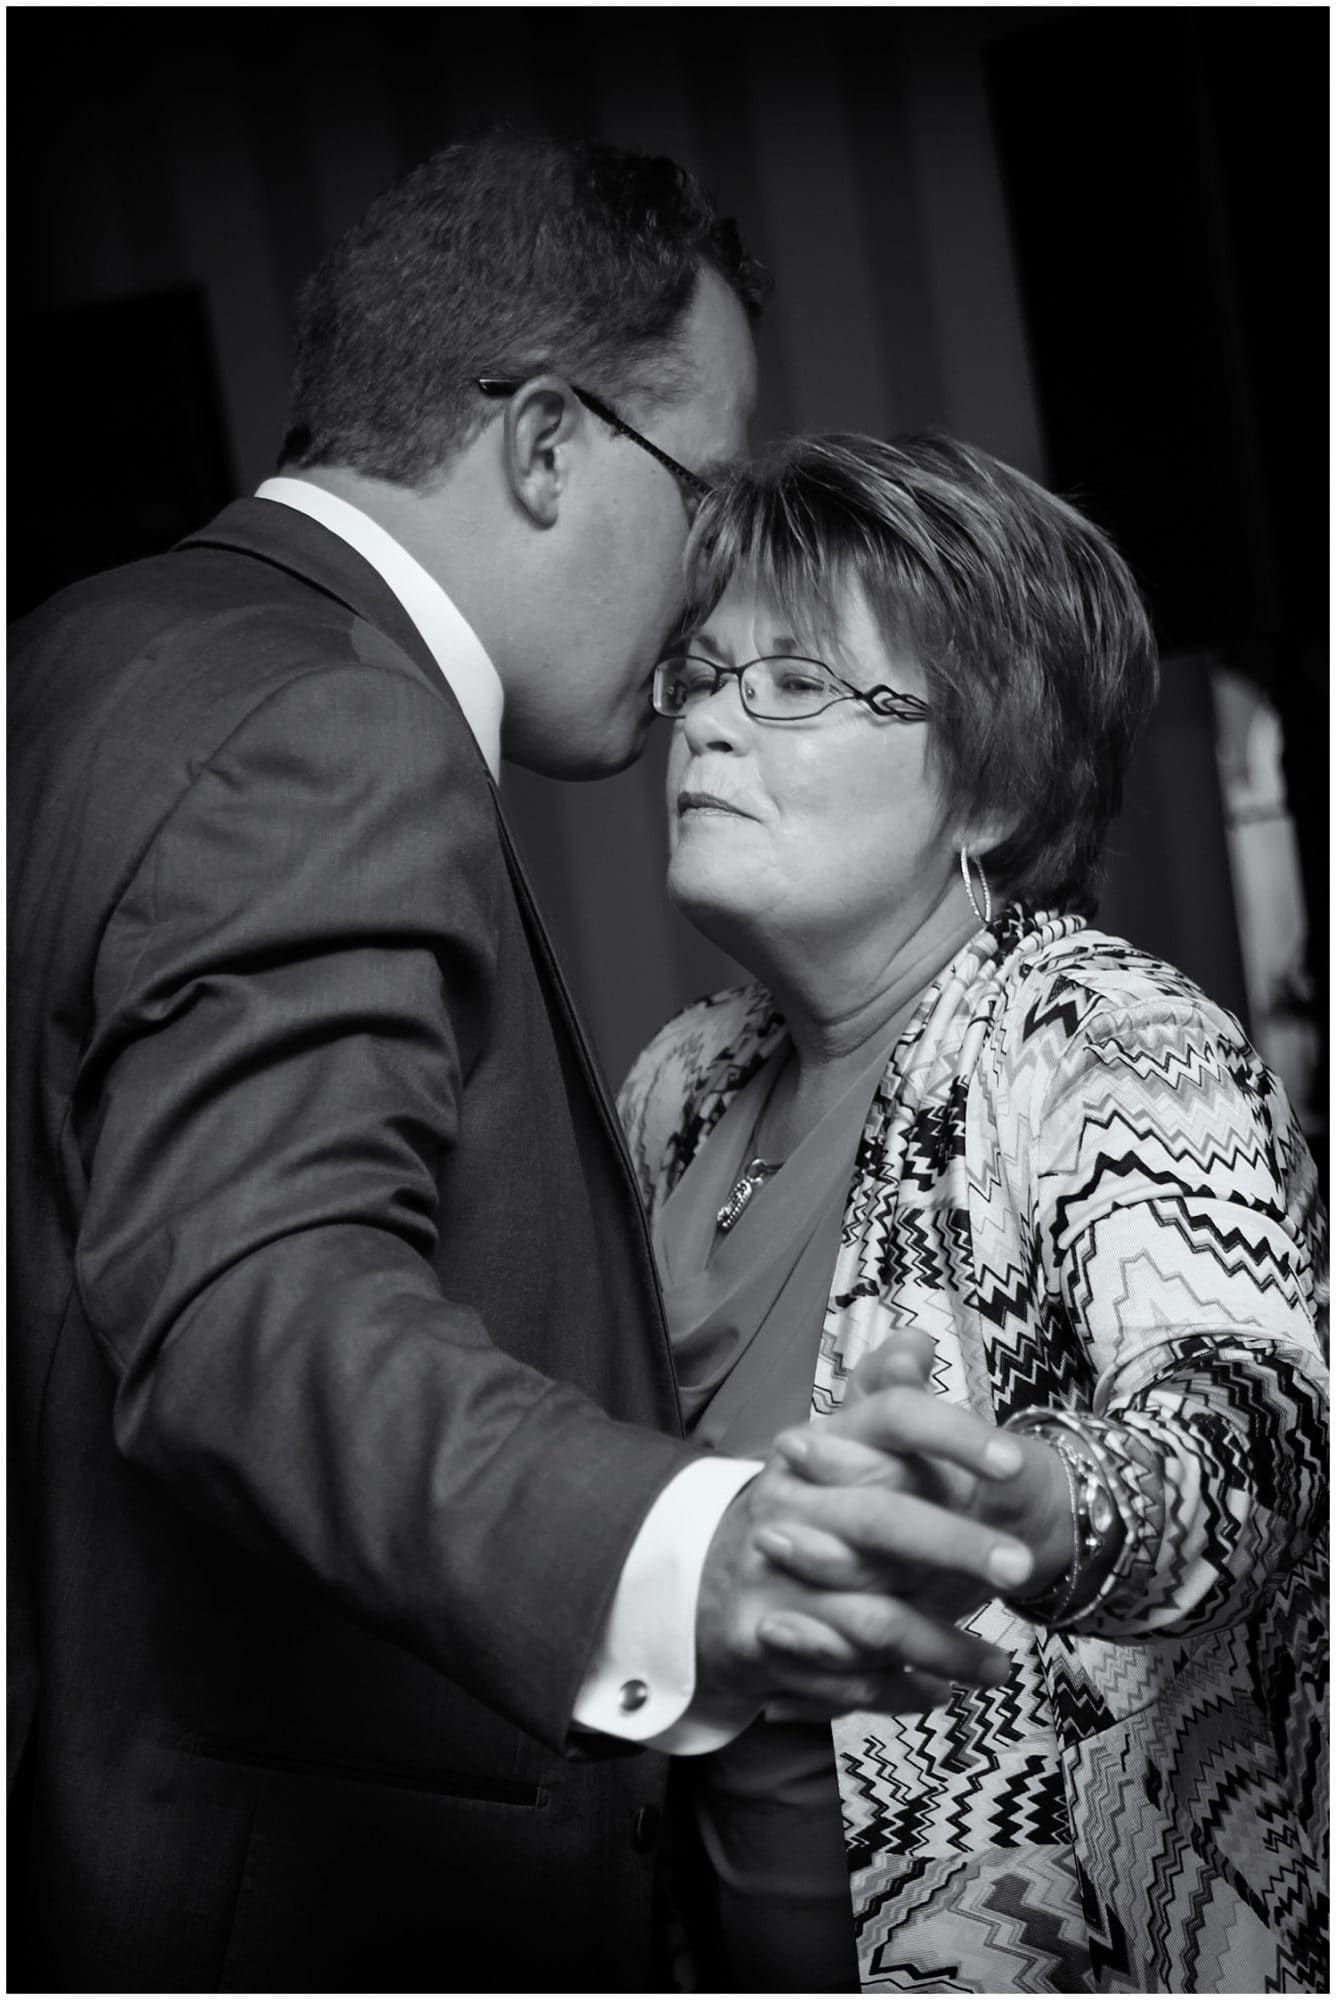 The groom dances with his mother during the parent dances at his wedding reception in the Ashburn Golf Club in Halifax.